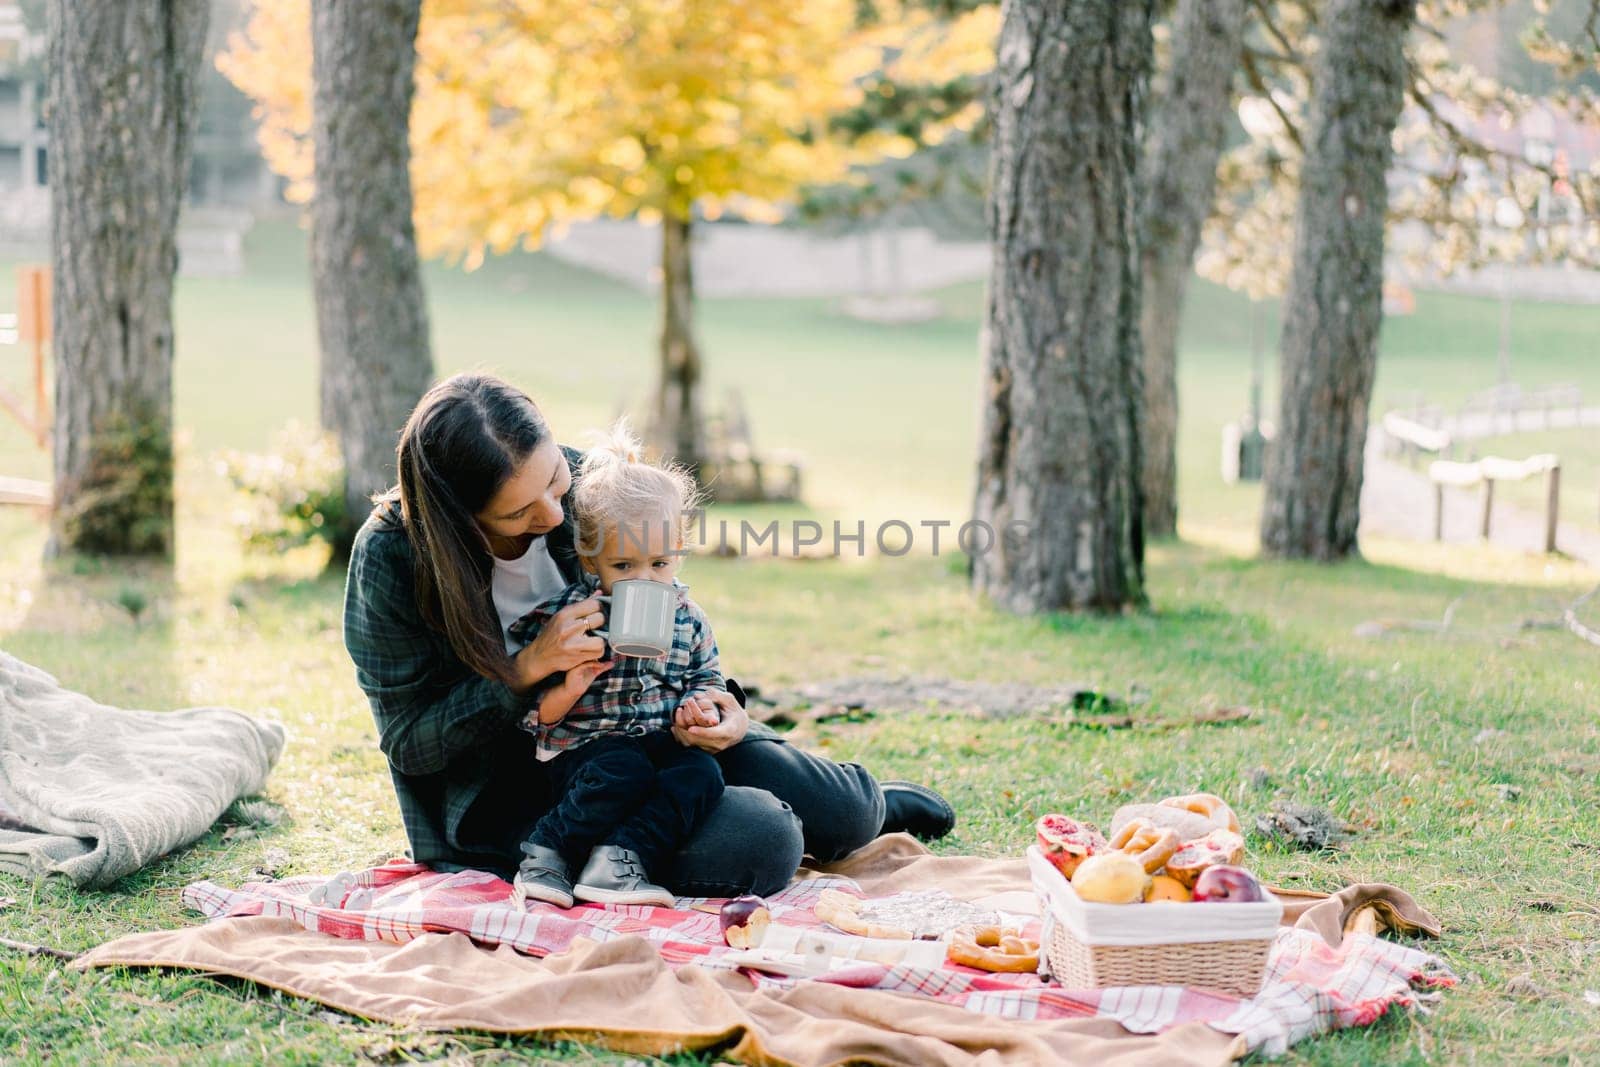 Mom gives a drink to a little girl from a mug at a picnic on a blanket in the park by Nadtochiy